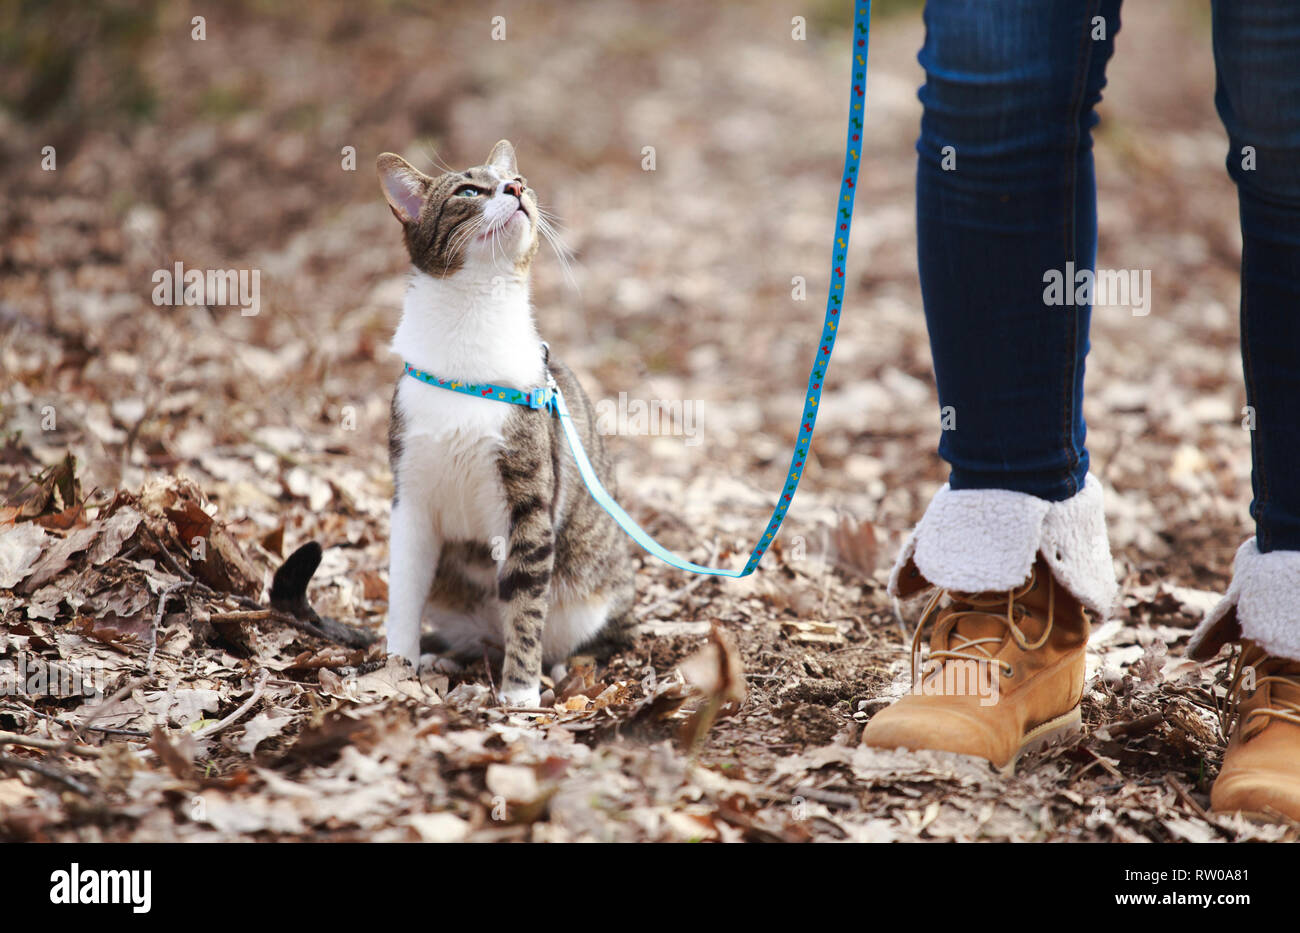 Woman owner walking  cat on a leash outdoors in nature Stock Photo